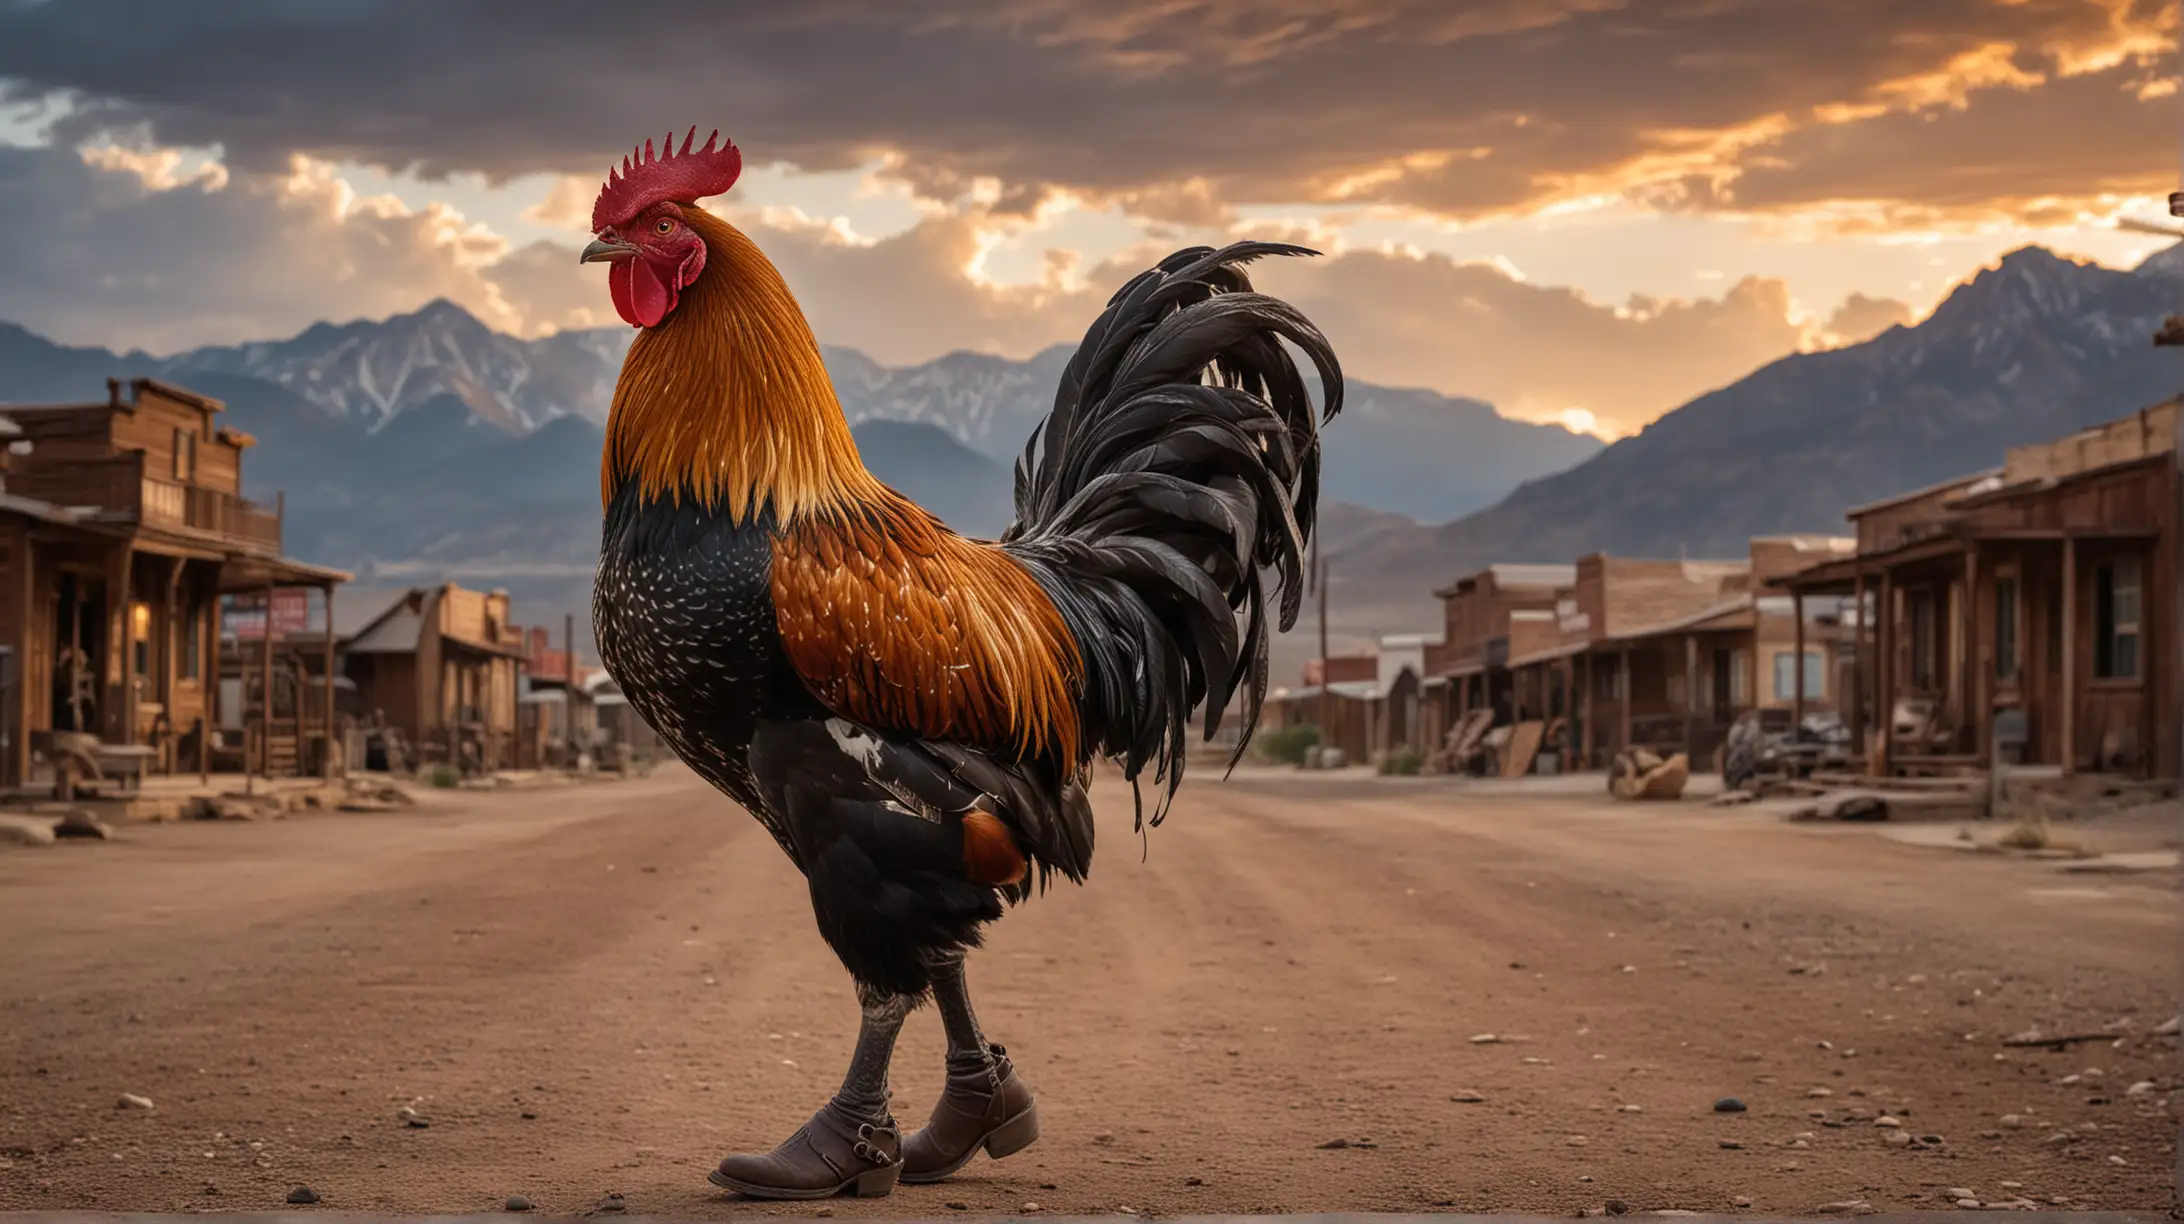 Rooster Cowboy in Old West Town with Dramatic Sky